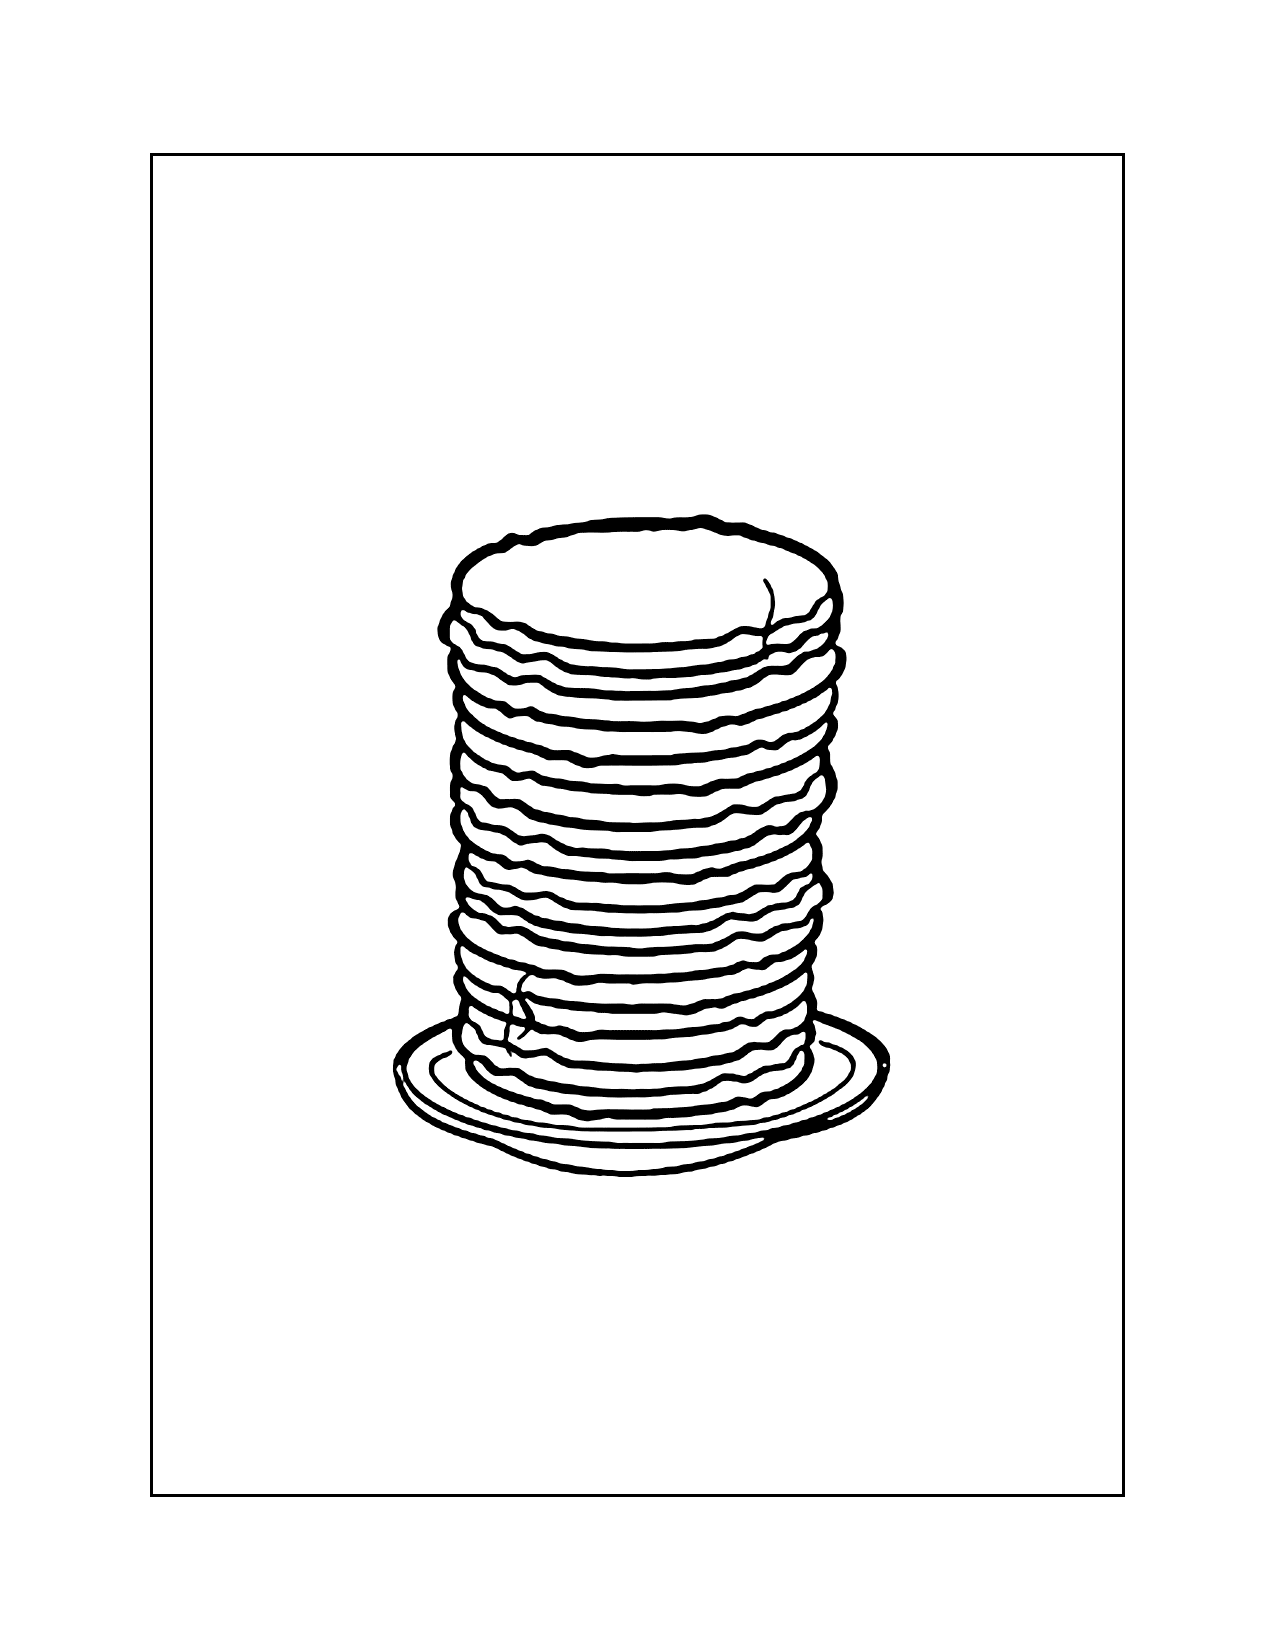 Tall Stack Of Pancakes Coloring Pages